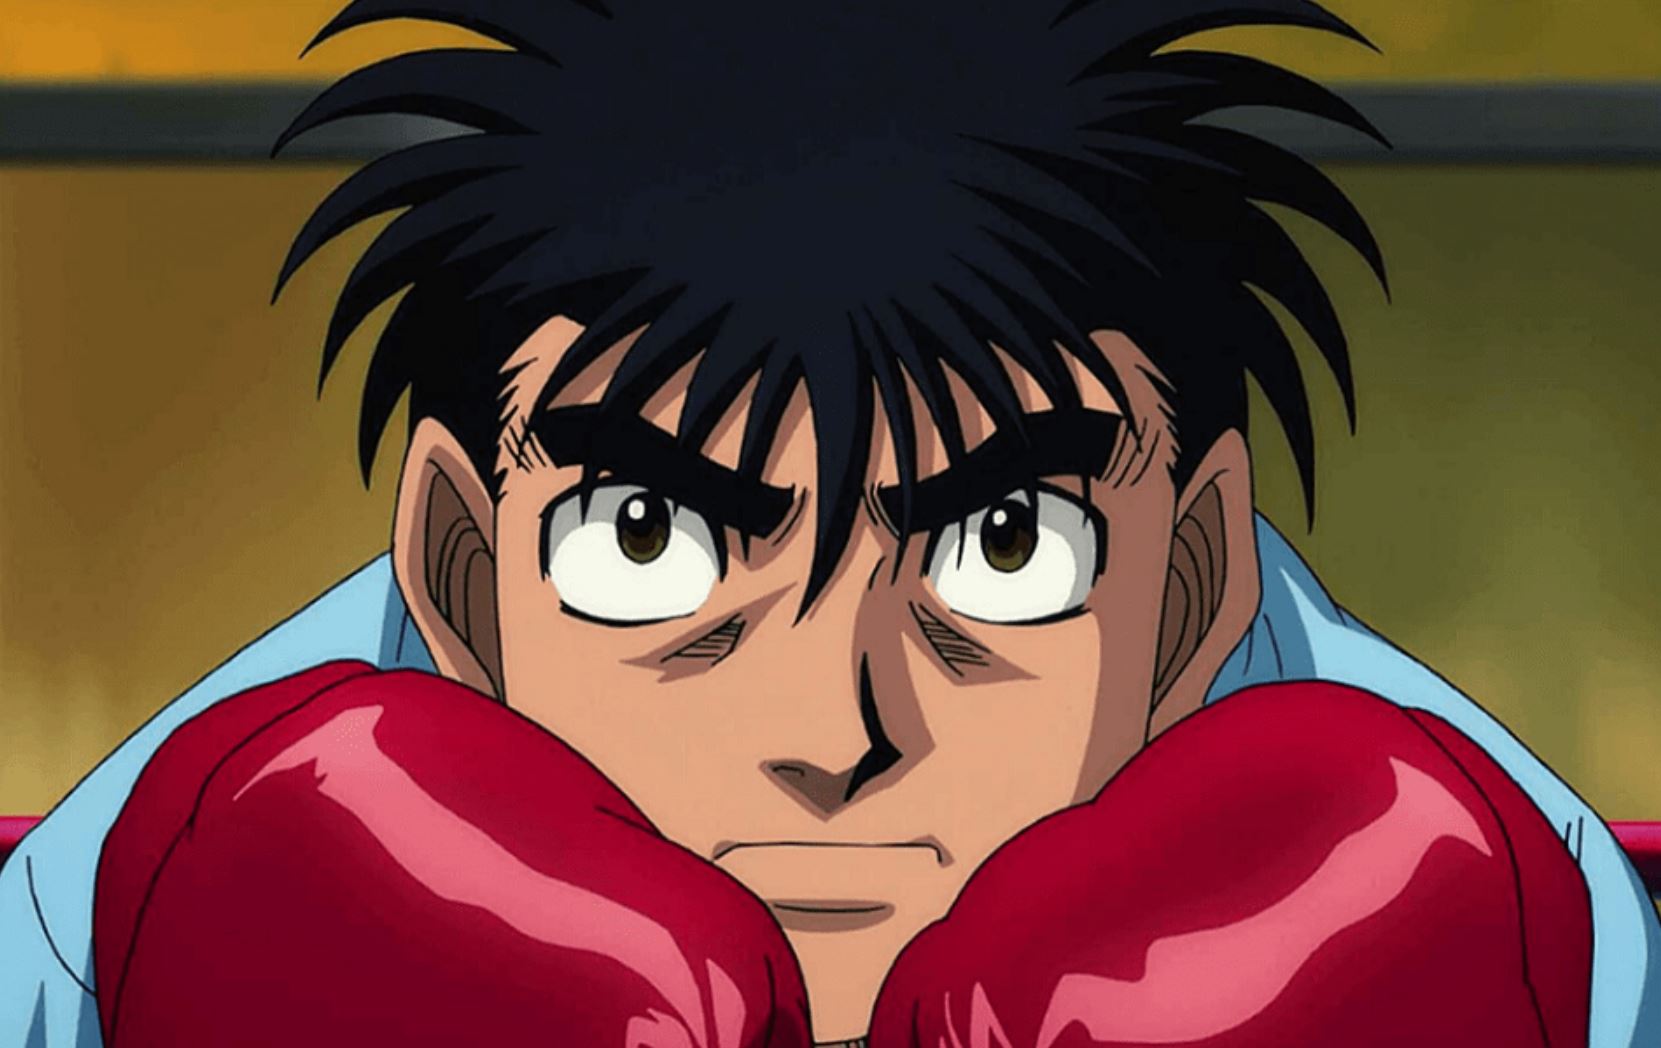 The BEST episodes of Hajime no Ippo